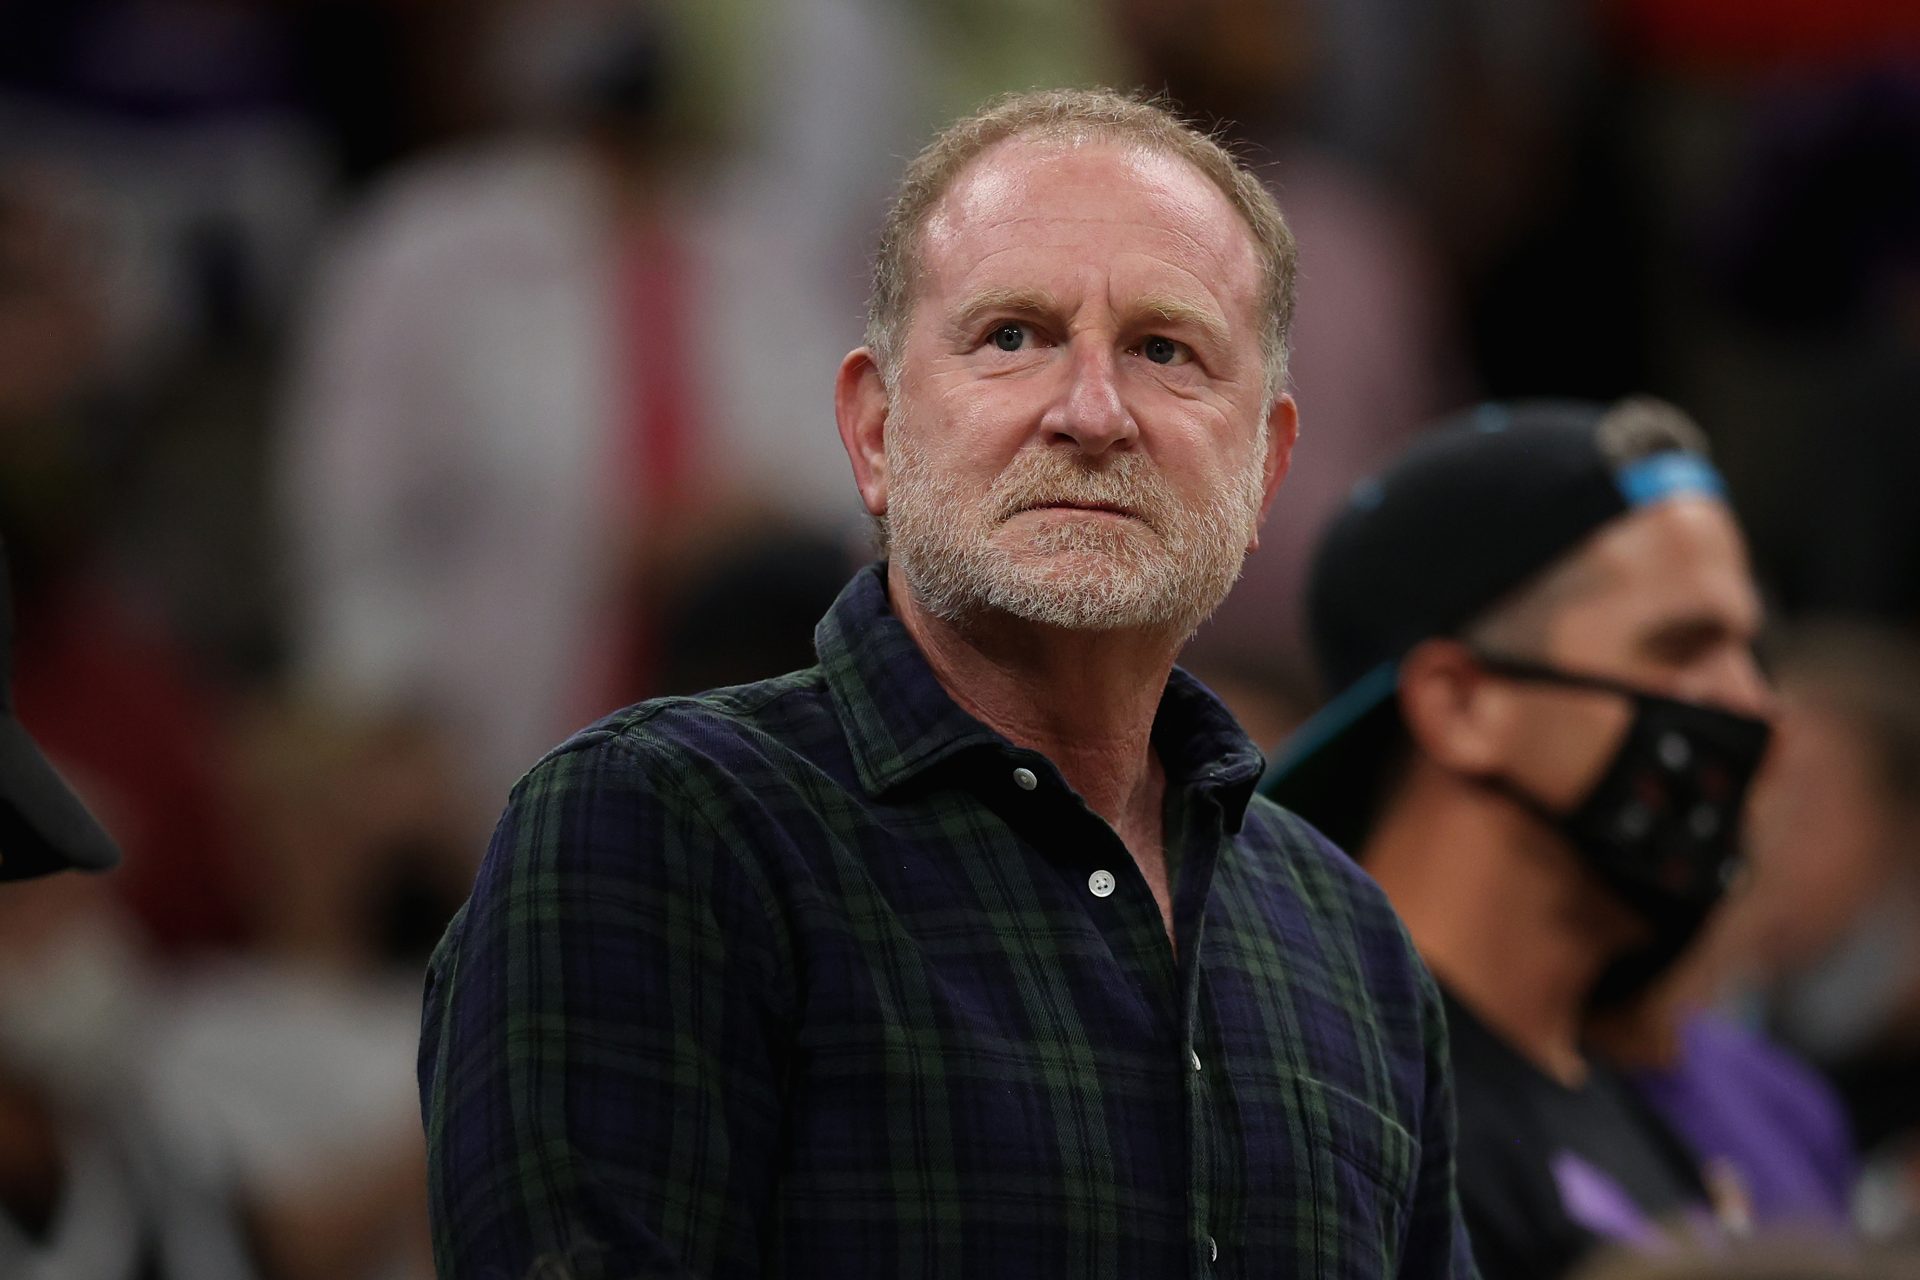 Phoenix Suns Owner Robert Sarver Receives 1 Year Suspension & $10 Million Fine After Investigation Concludes He Made Racial & Misogynistic Comments